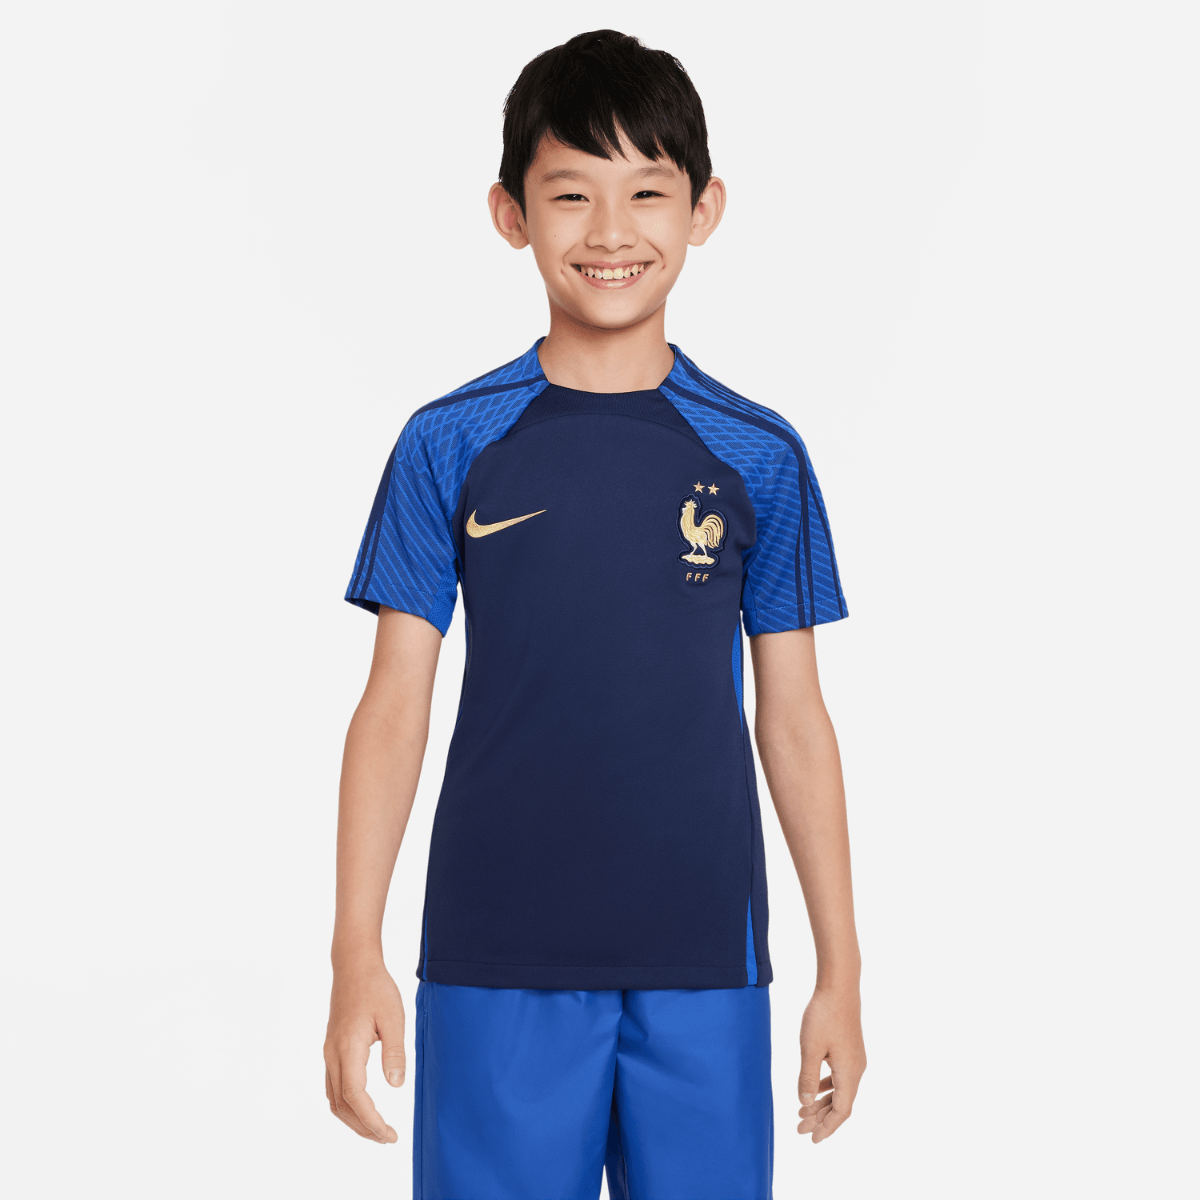 2022 French Junior Team training jersey - Blue/Gold